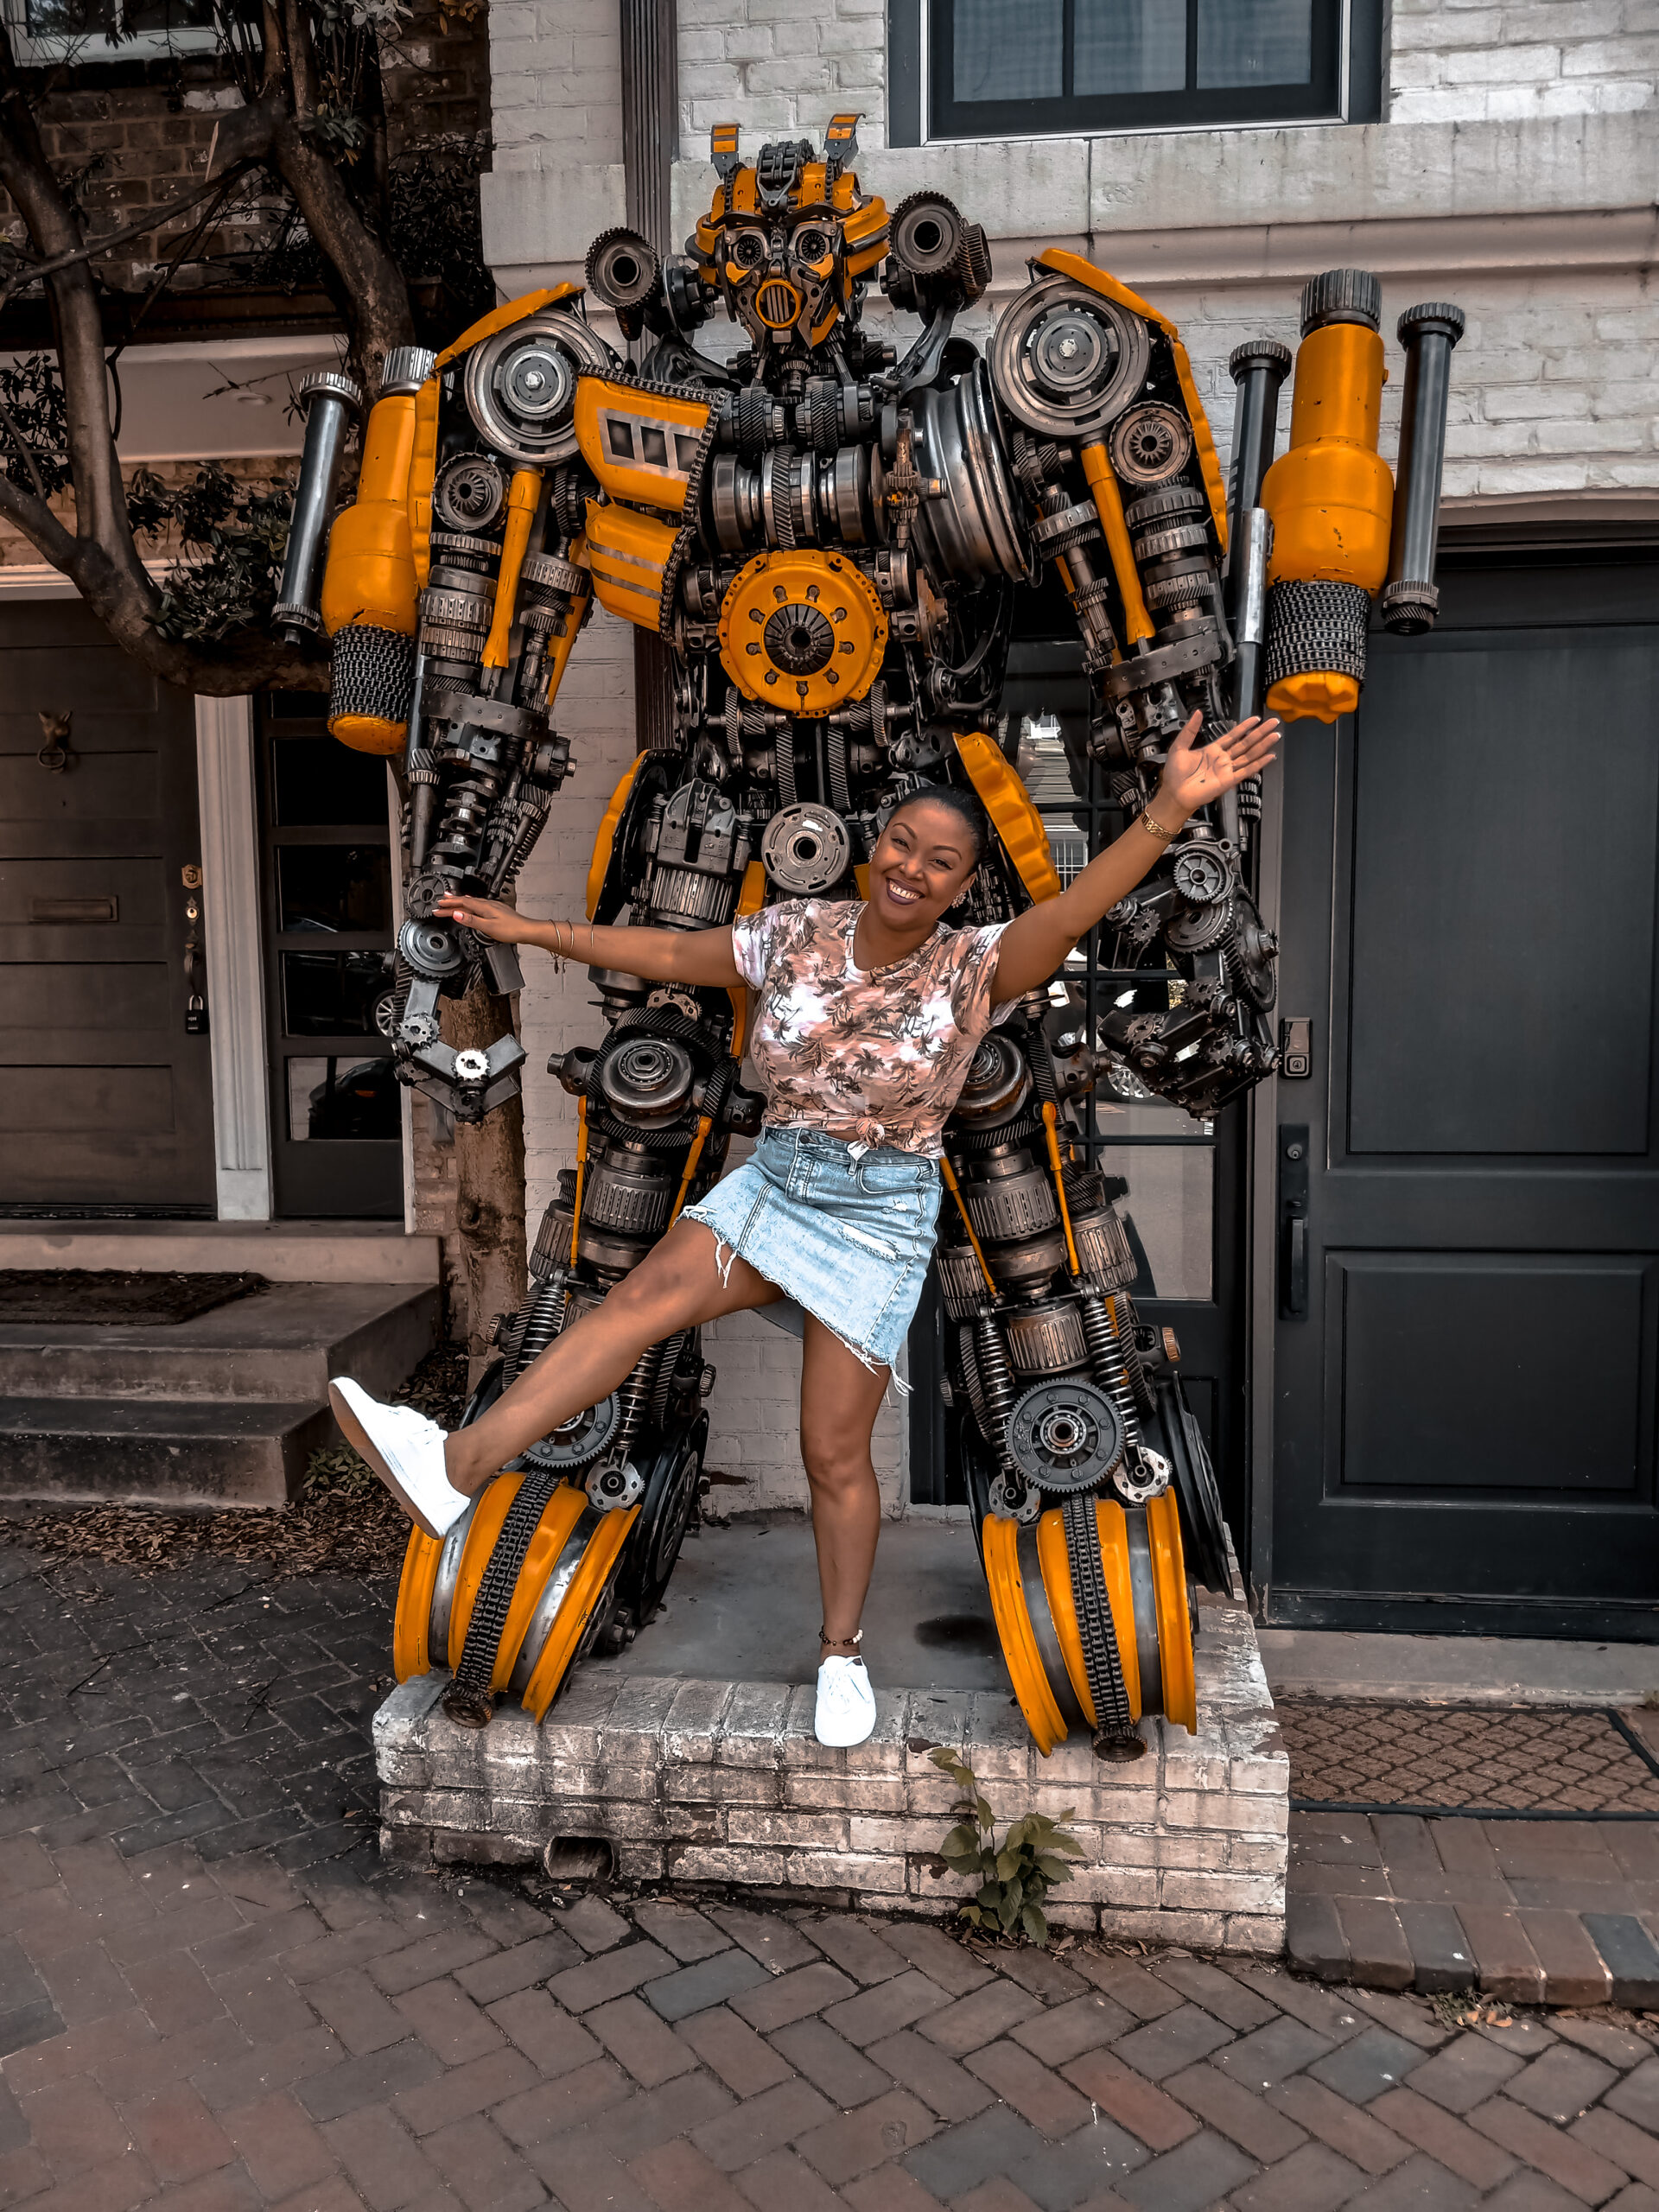 DC blogger Rogan Smith of This Bahamian Gyal poses in front of the Transformers house in Georgetown DC. She is shown in the picture with the robot, Bumblebee.